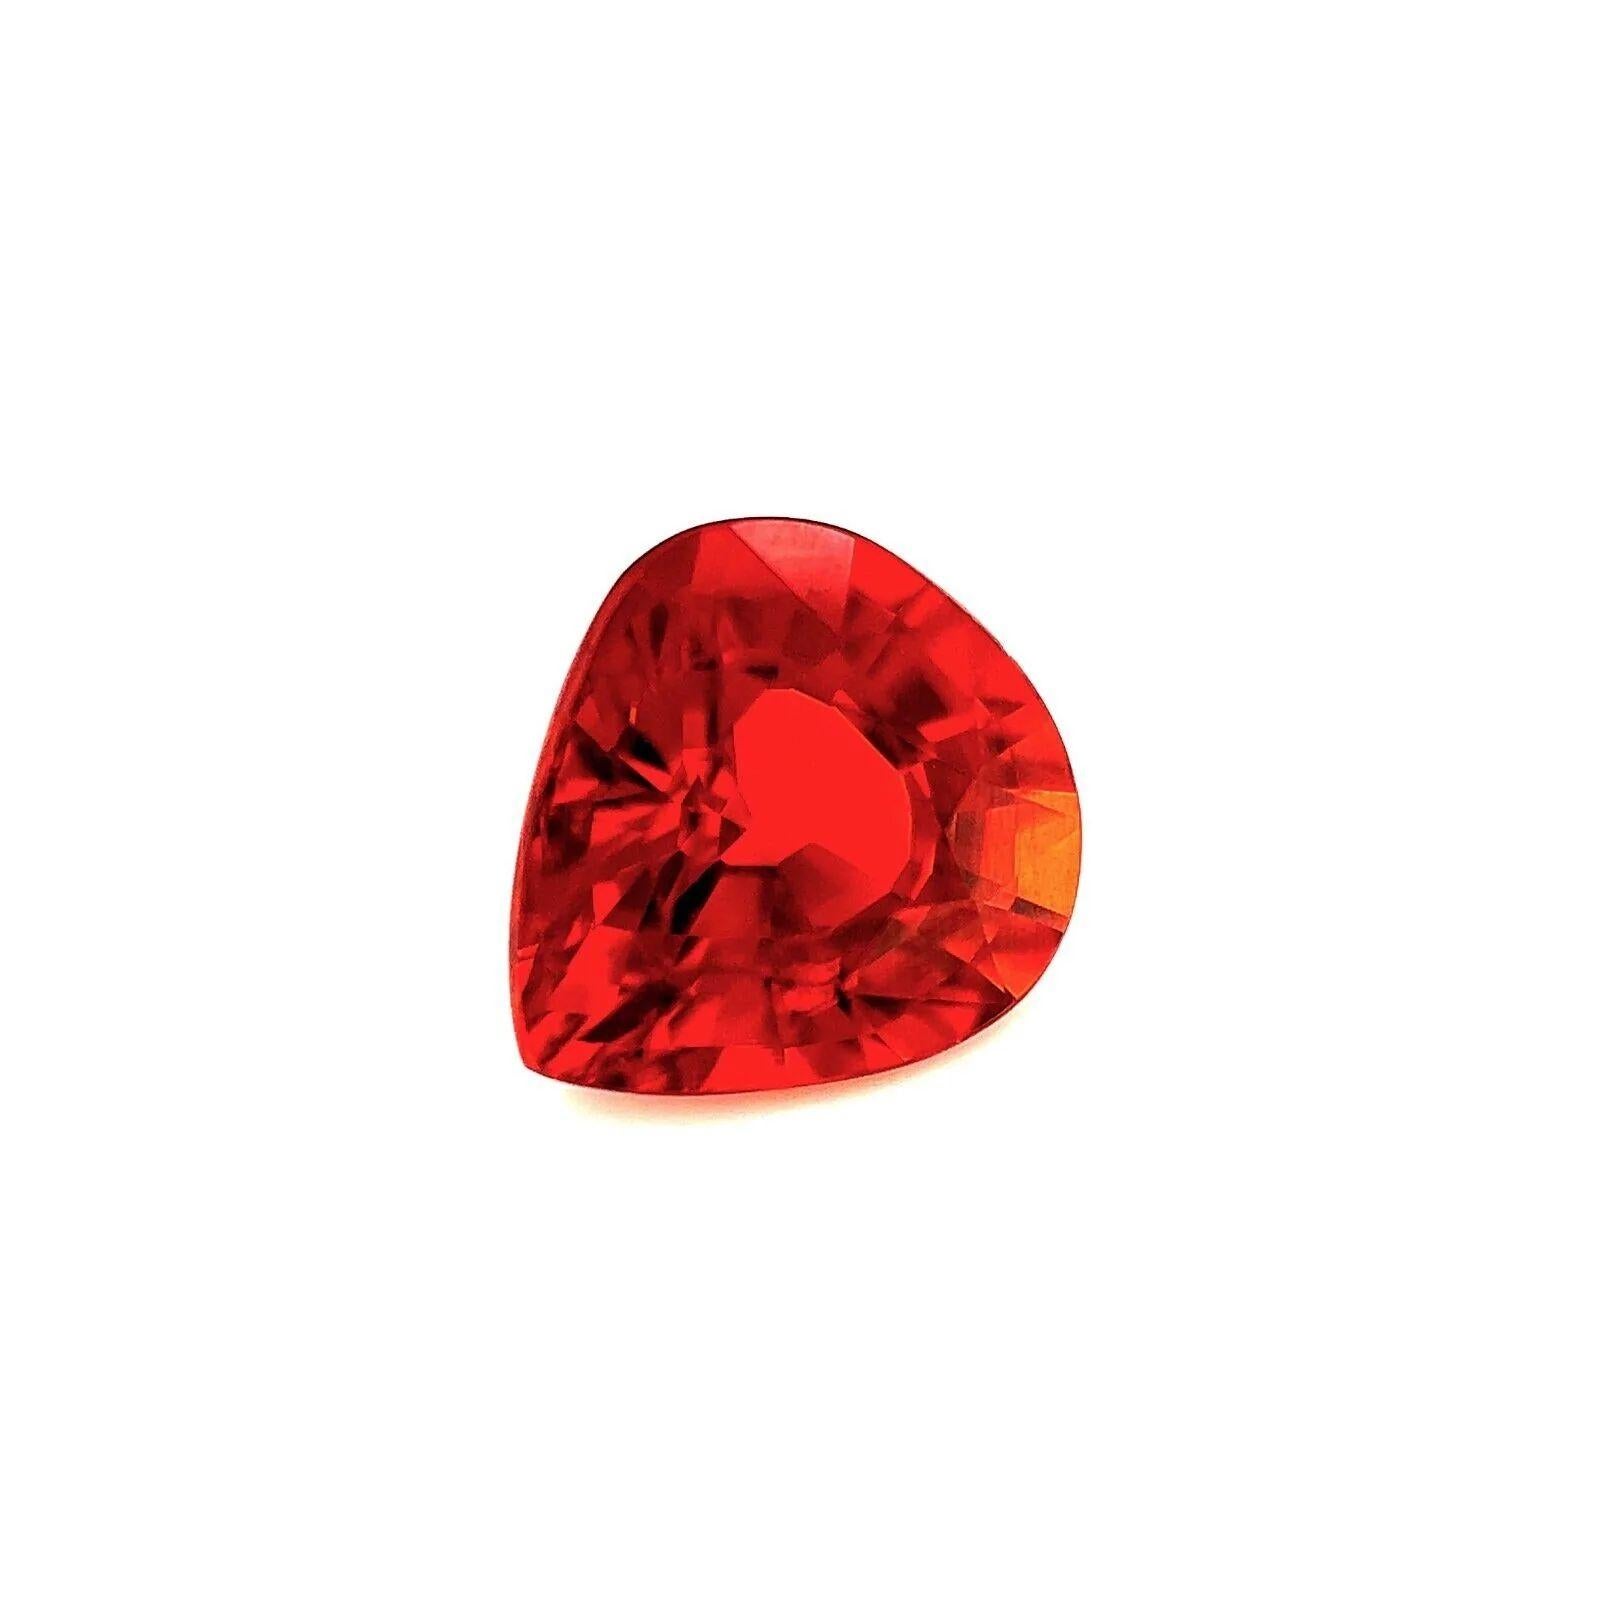 Fine 2.26ct Vivid Orange Red Spessartine Garnet Pear Cut Loose Gem 8x7.5mm

Fine Natural Spessartine Garnet Loose Gem.
2.26 Carat stone with a beautiful reddish orange colour and very good clarity. A clean stone with only some small natural